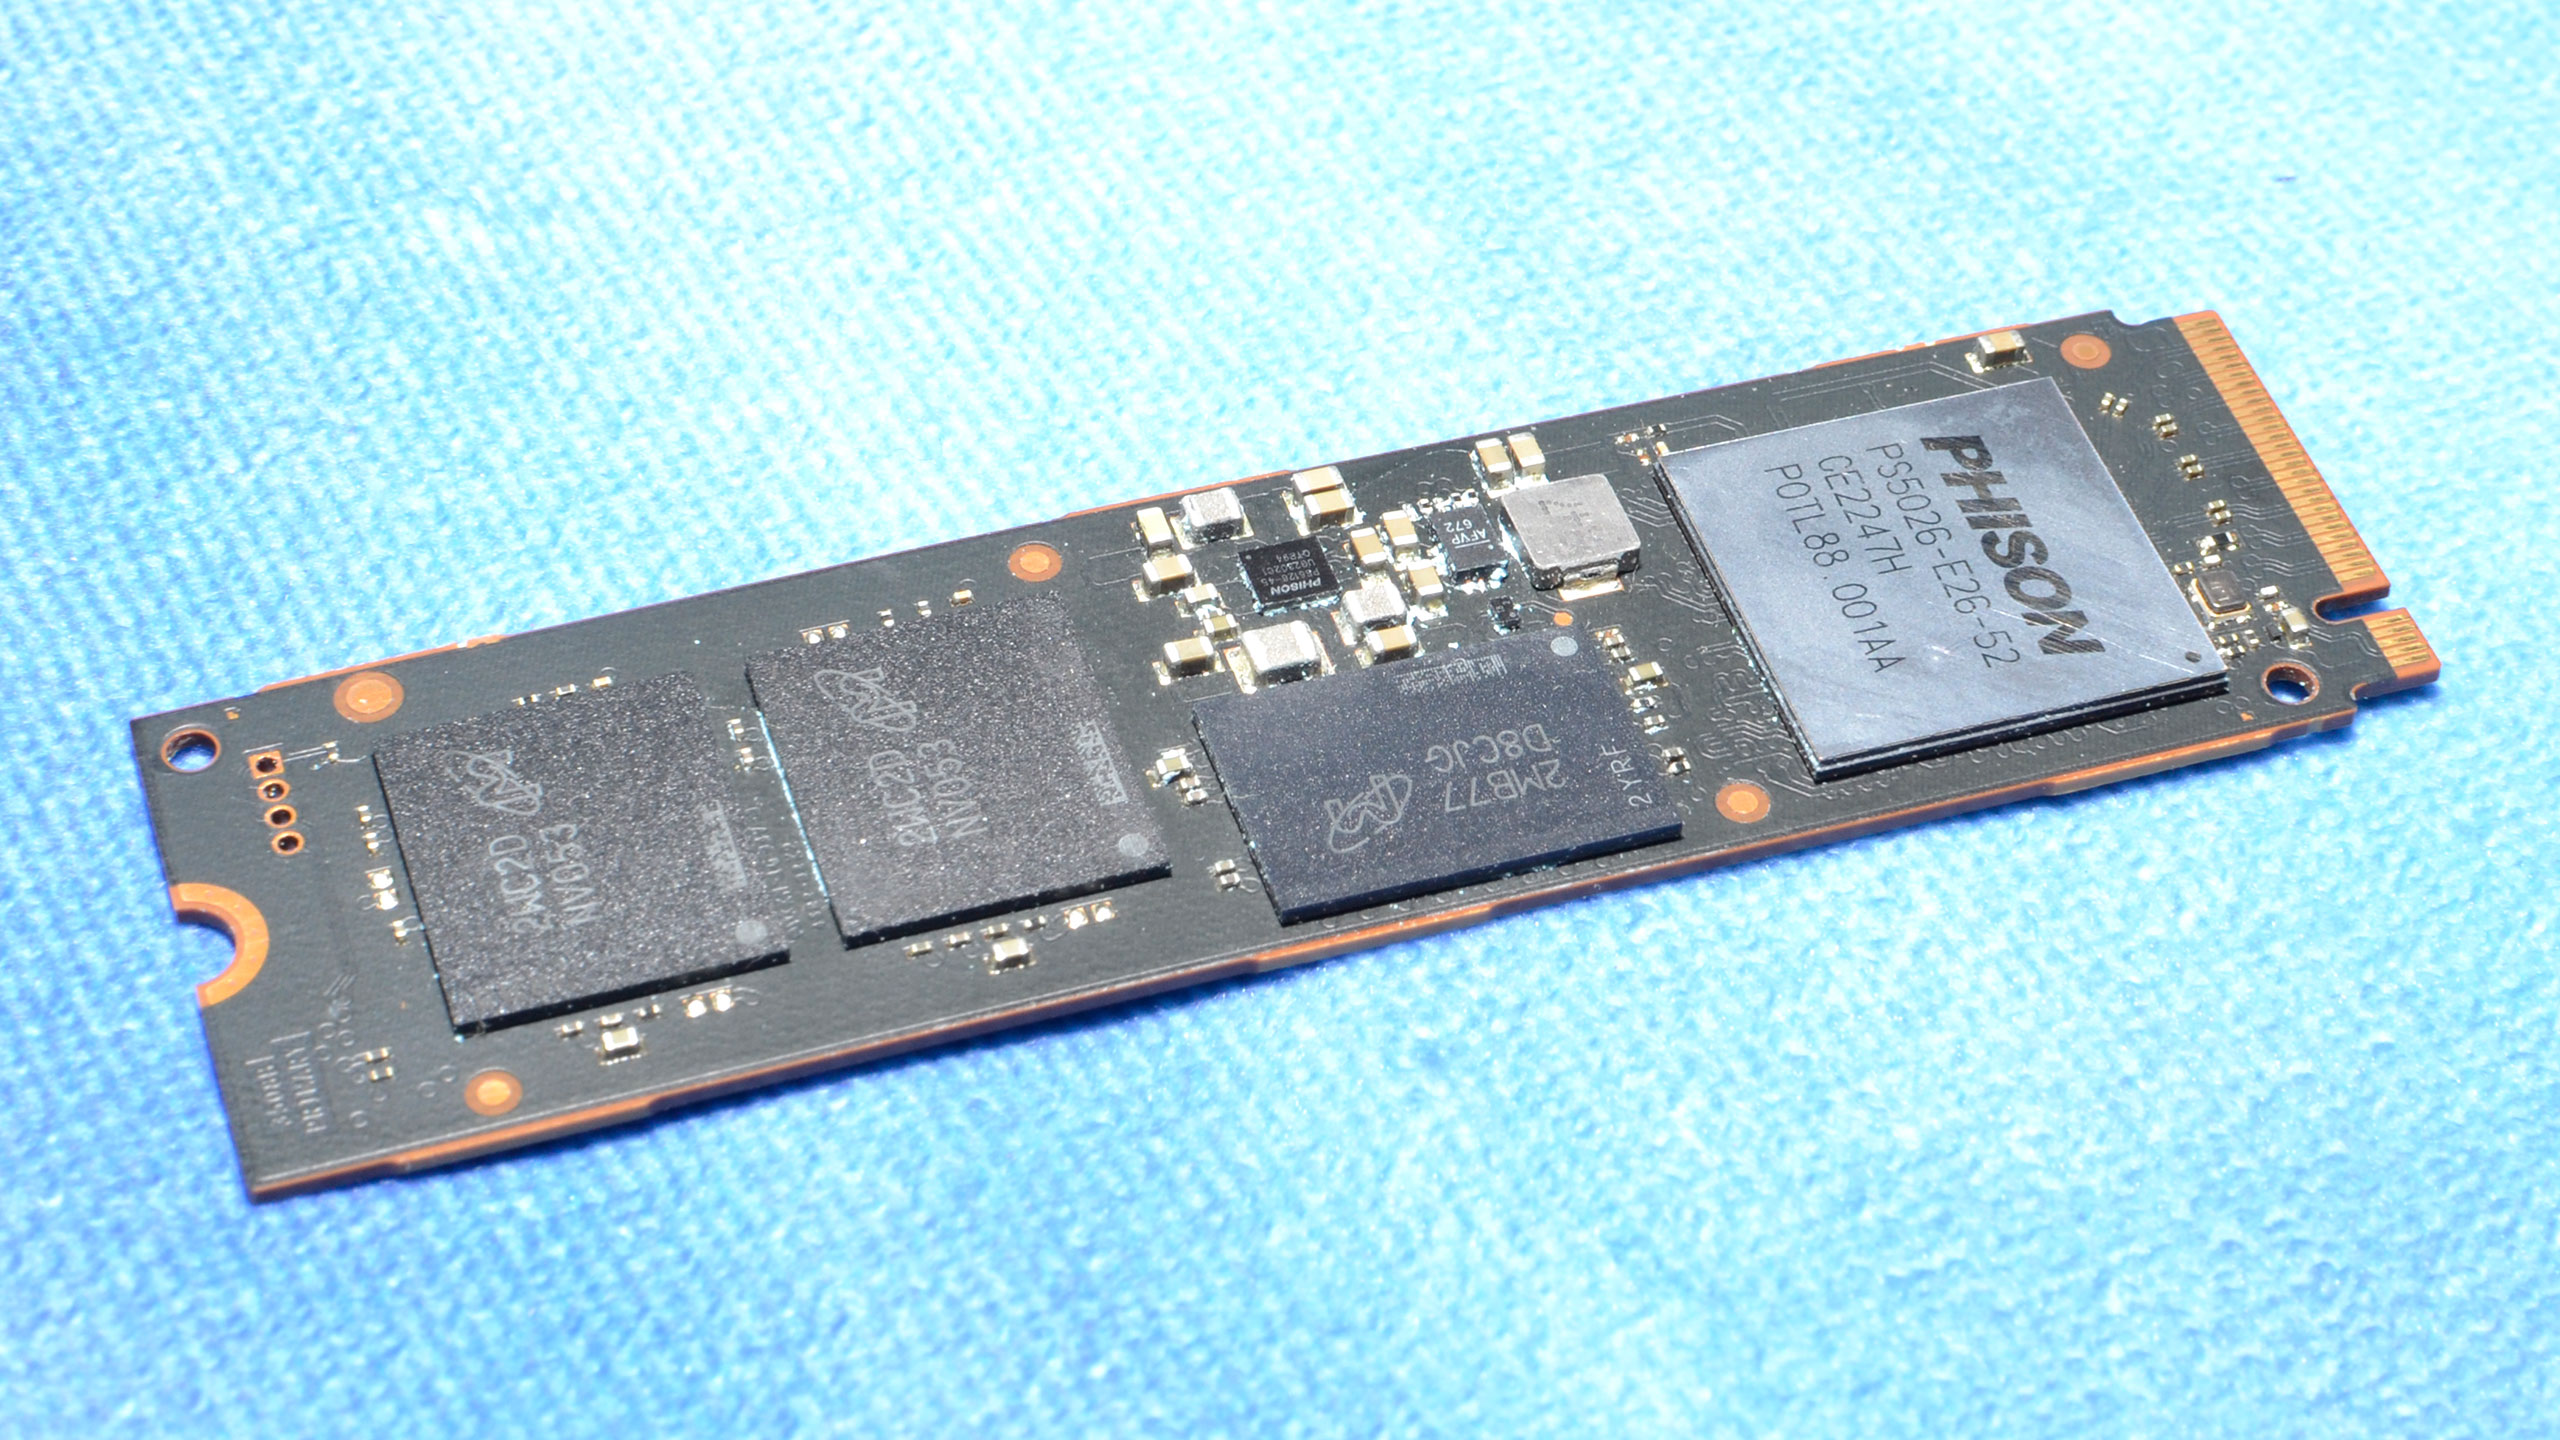 SSD Crucial T700